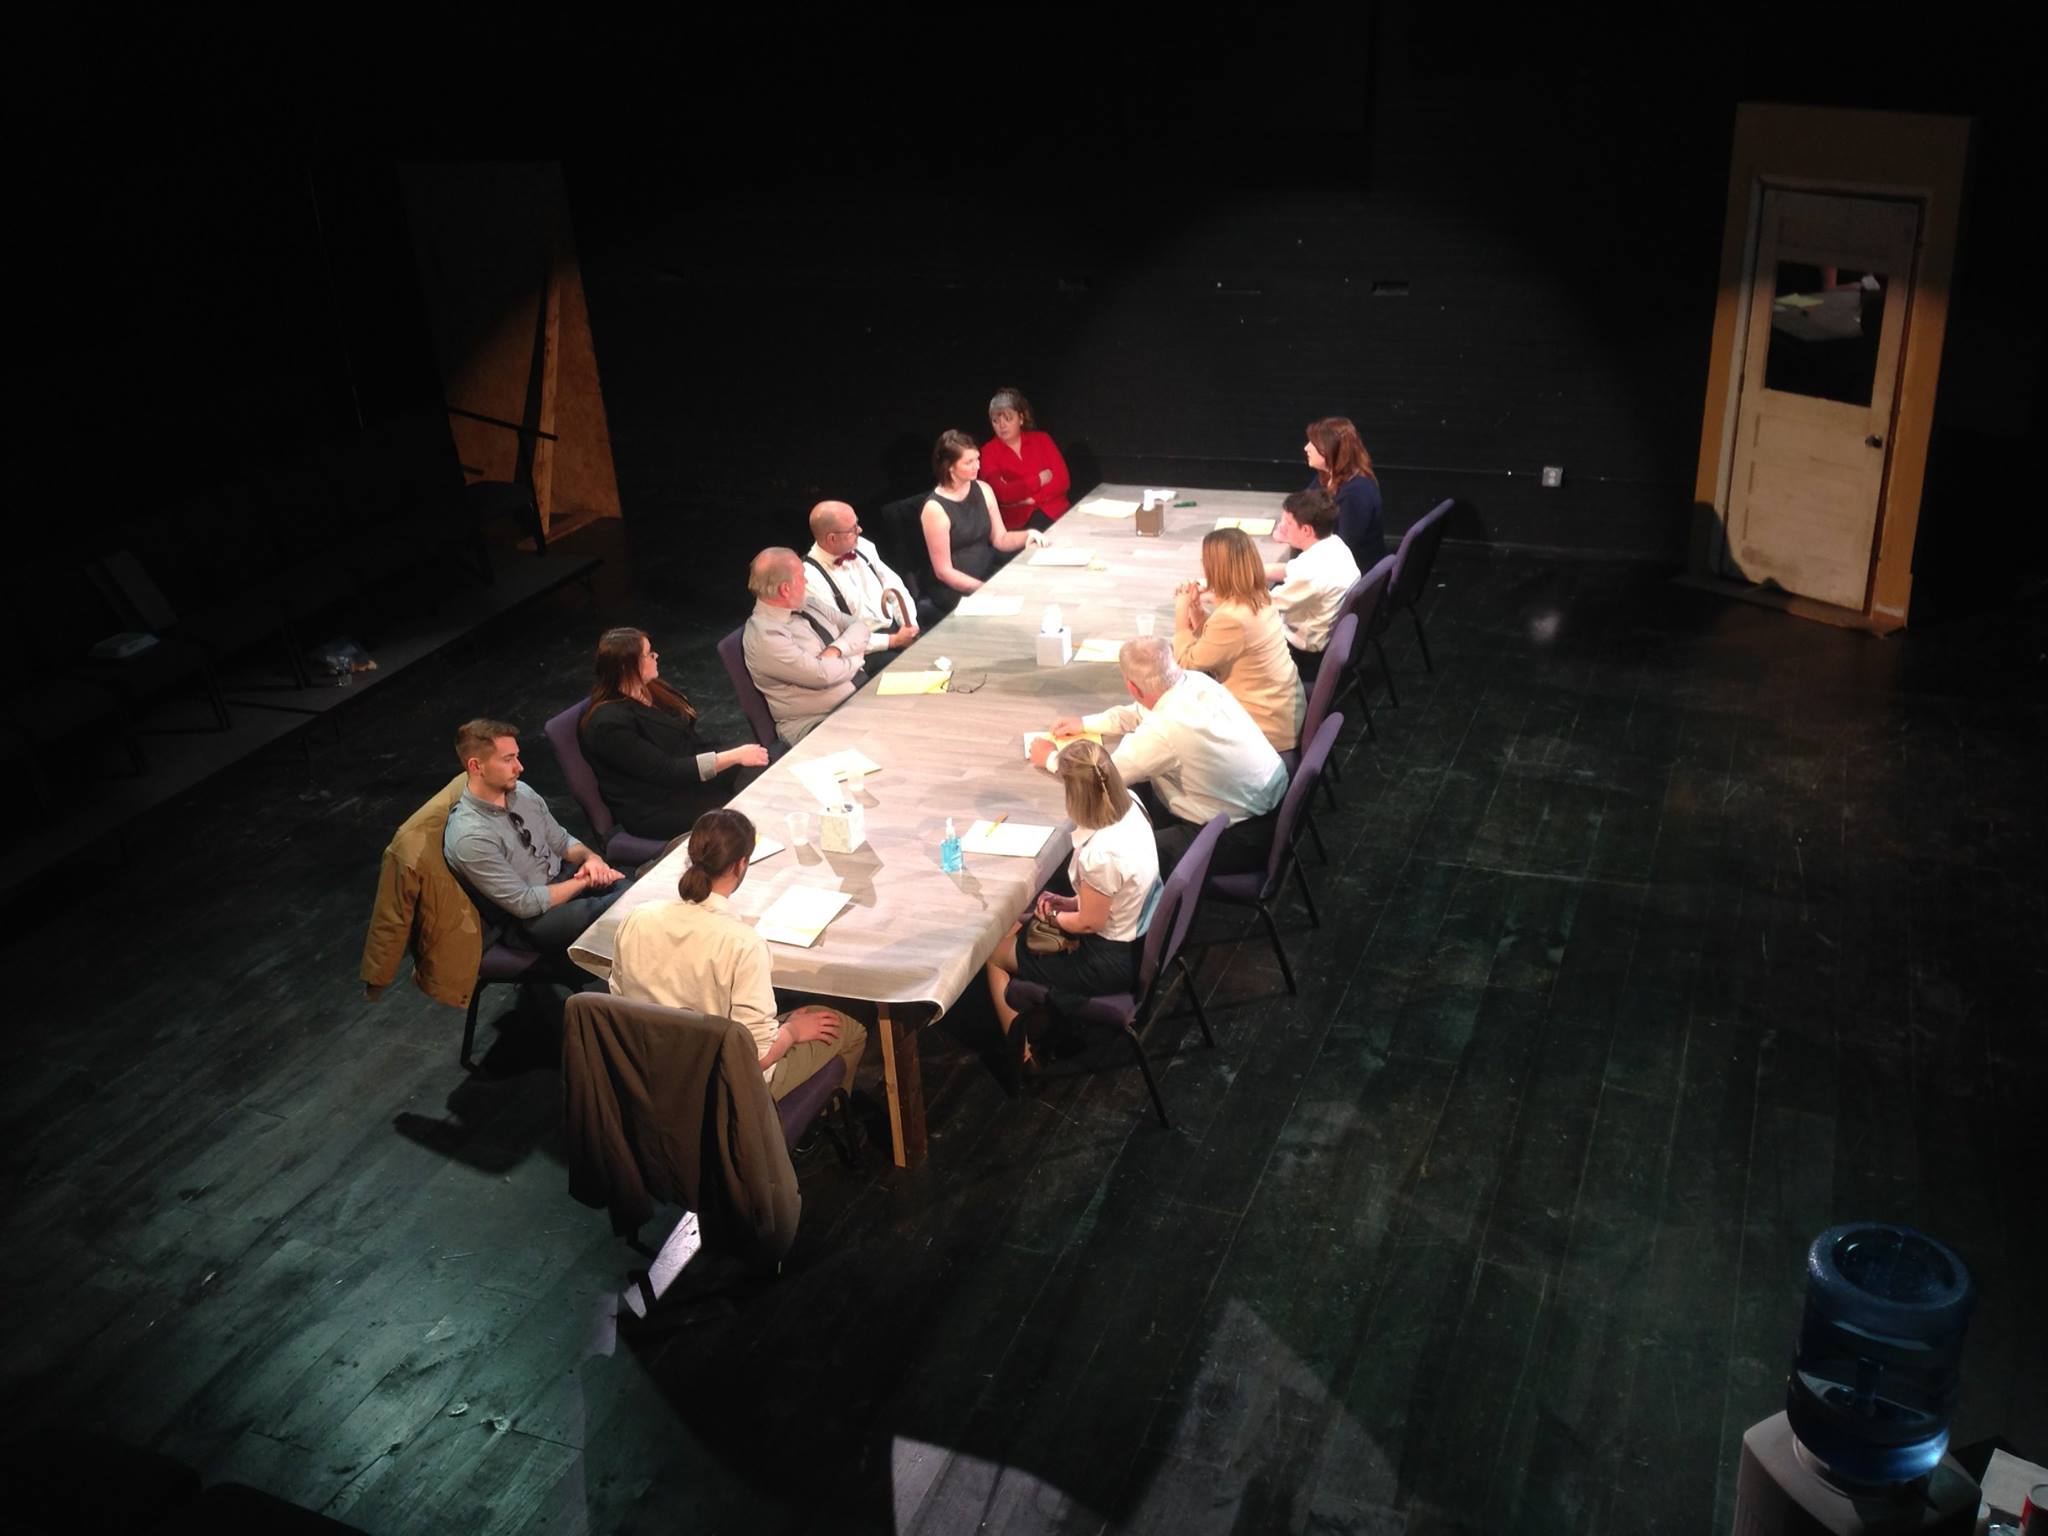 A recent run of "12 Angry Jurors" just concluded at The Citadel Stage.